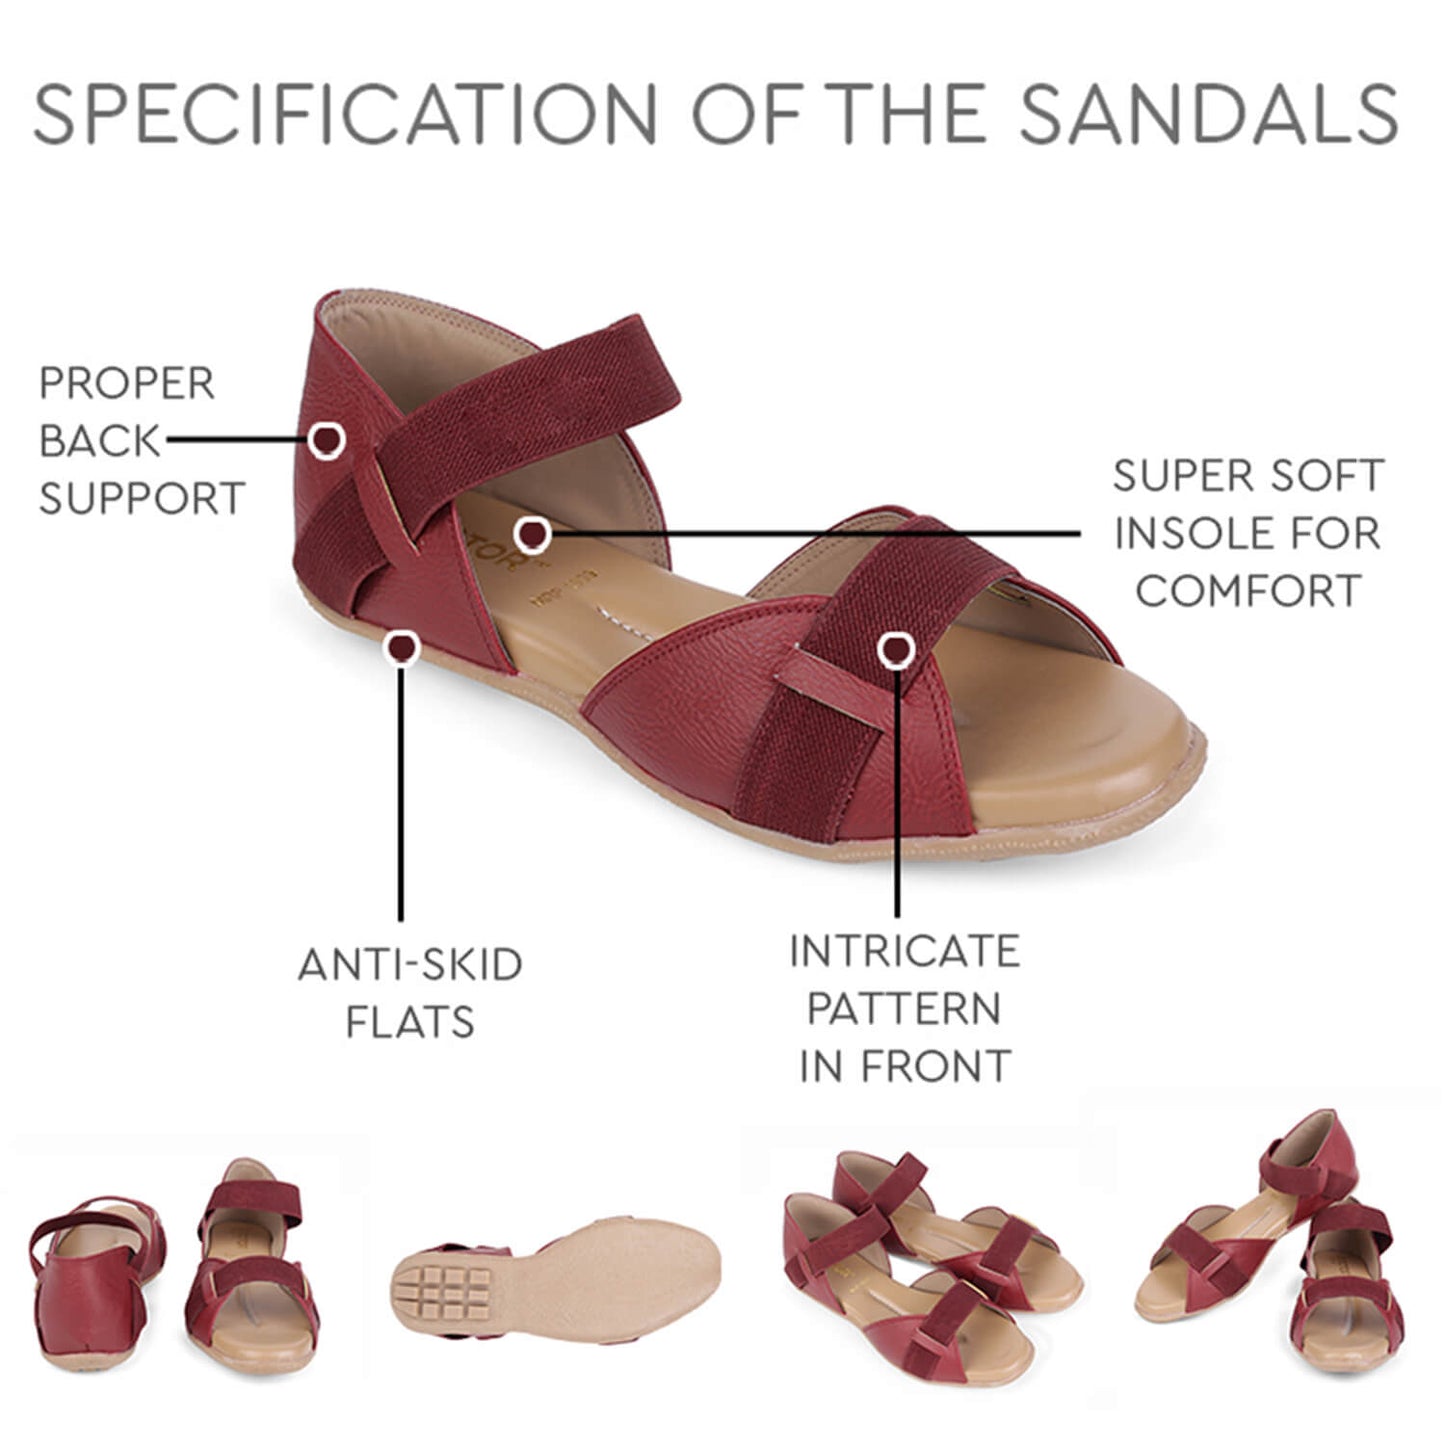 DOCTOR EXTRA SOFT Women's Sandals ART-533, Where Fashion Meets Comfort, Soft Insole, Back Support, Anti-Skid